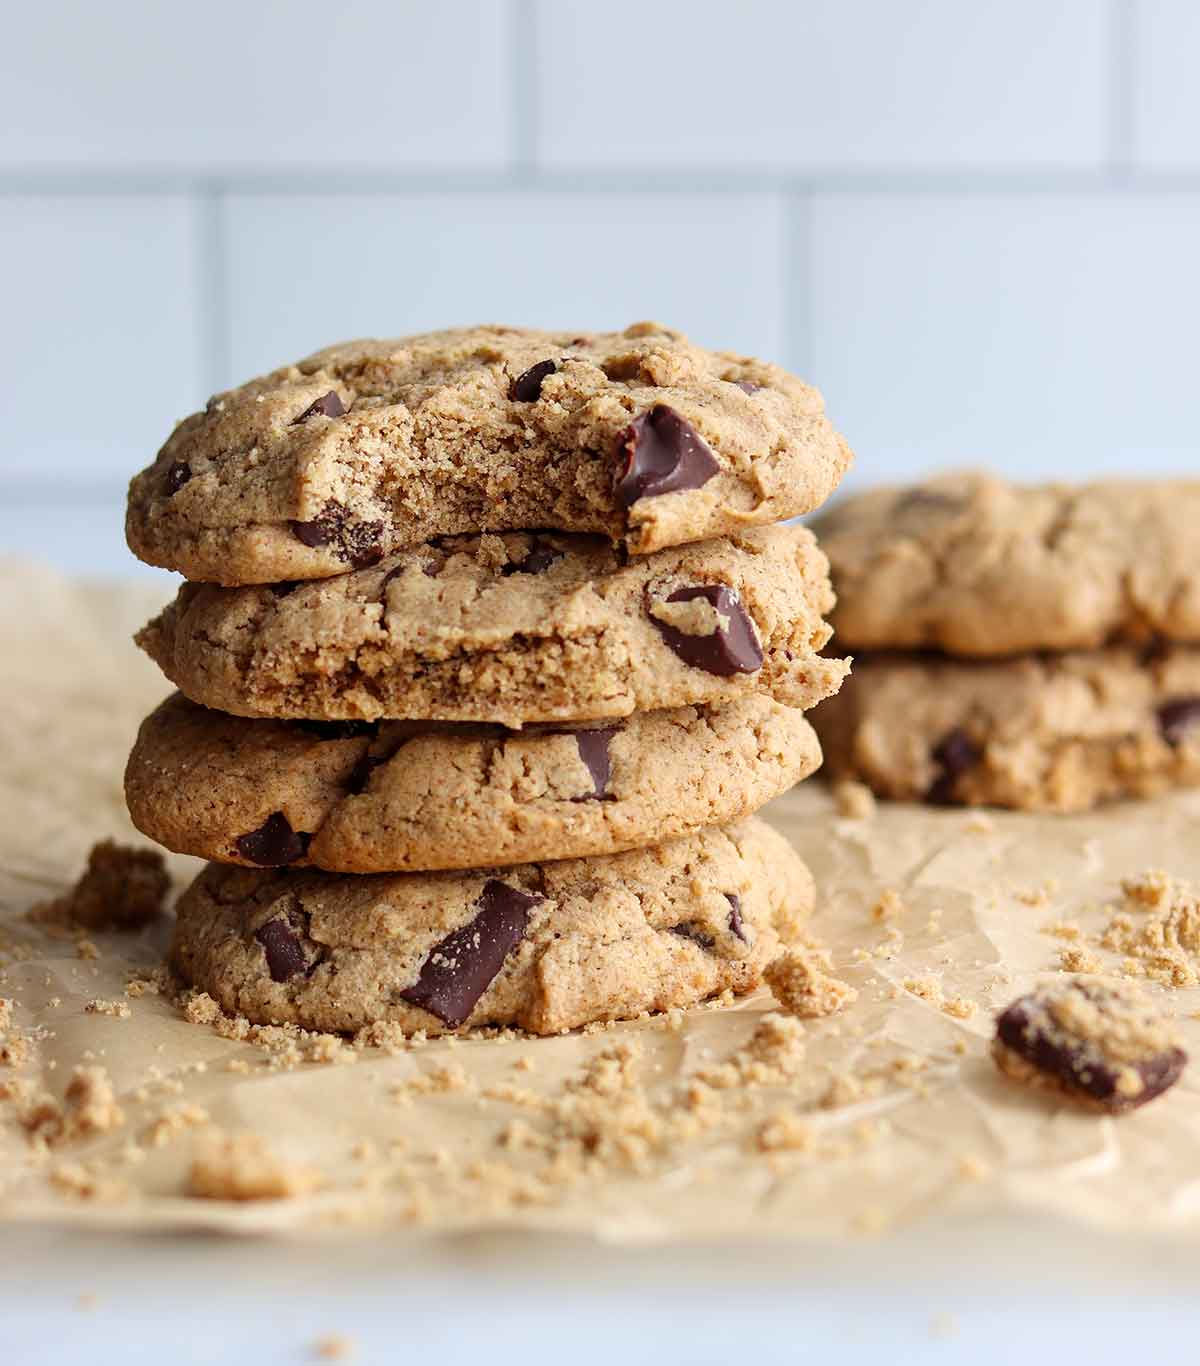 Stacked and partly eaten tigernut flour chocolate chip cookies